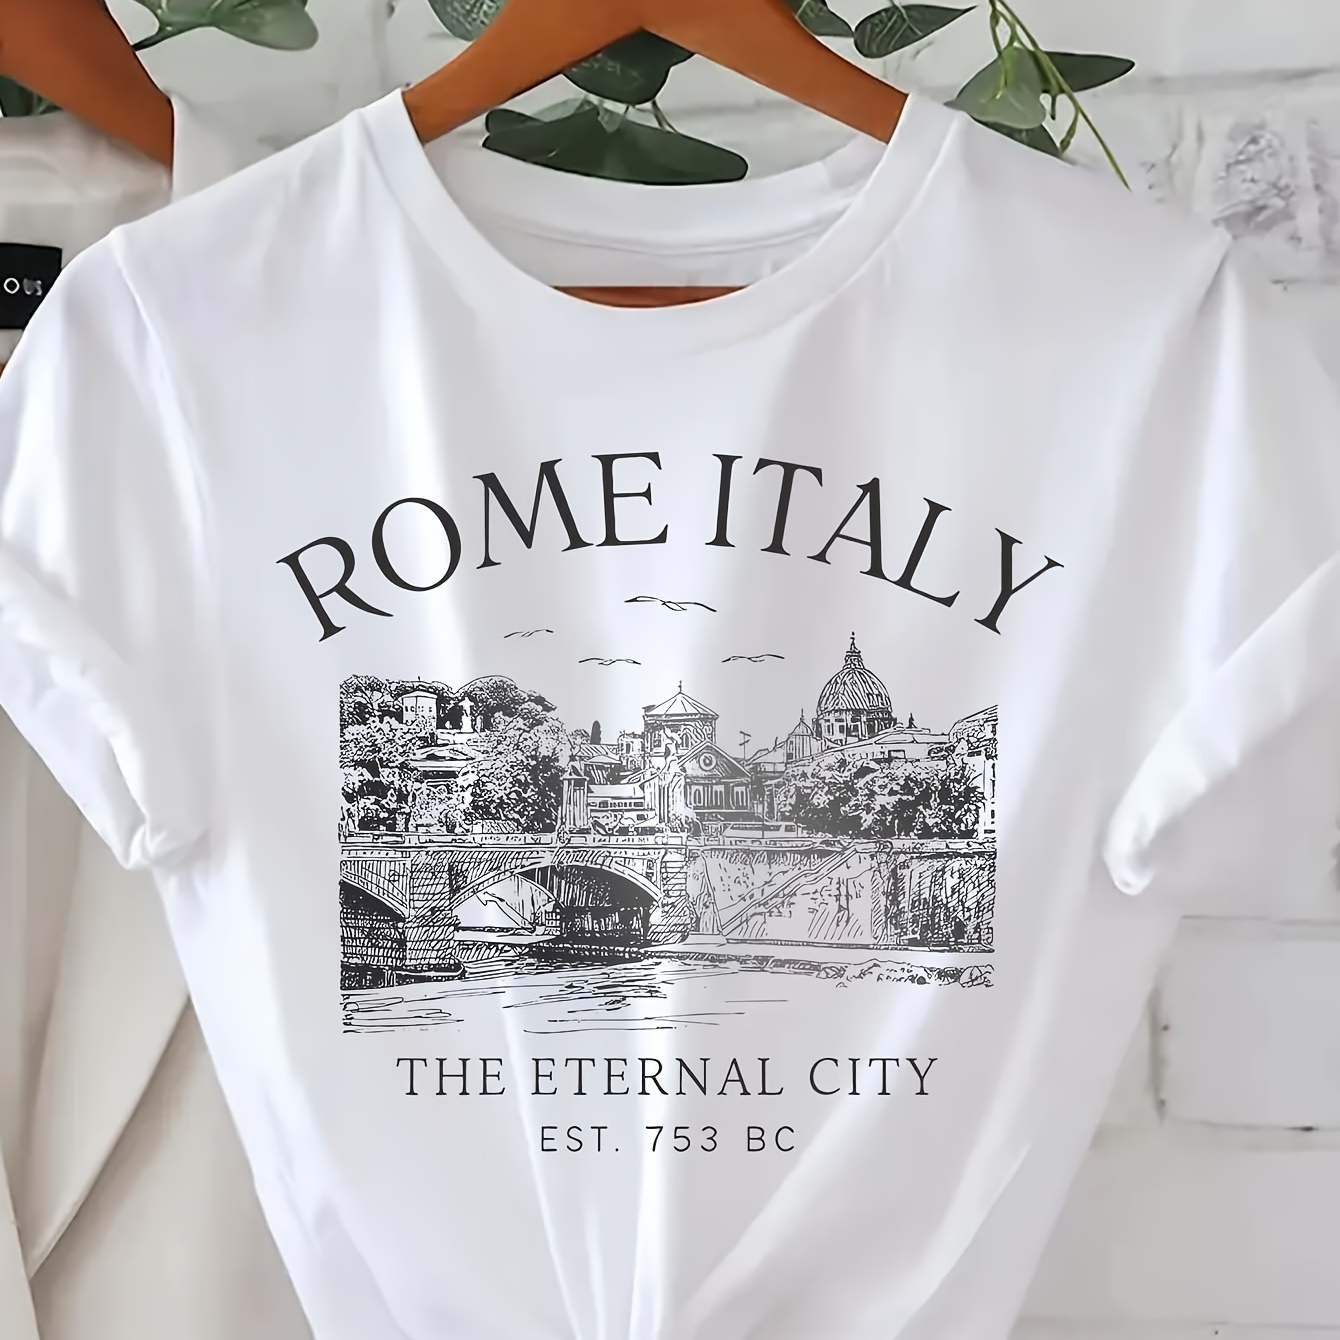 

Rome Italy Letter Print T-shirt, Short Sleeve Crew Neck Casual Top For Summer & Spring, Women's Clothing